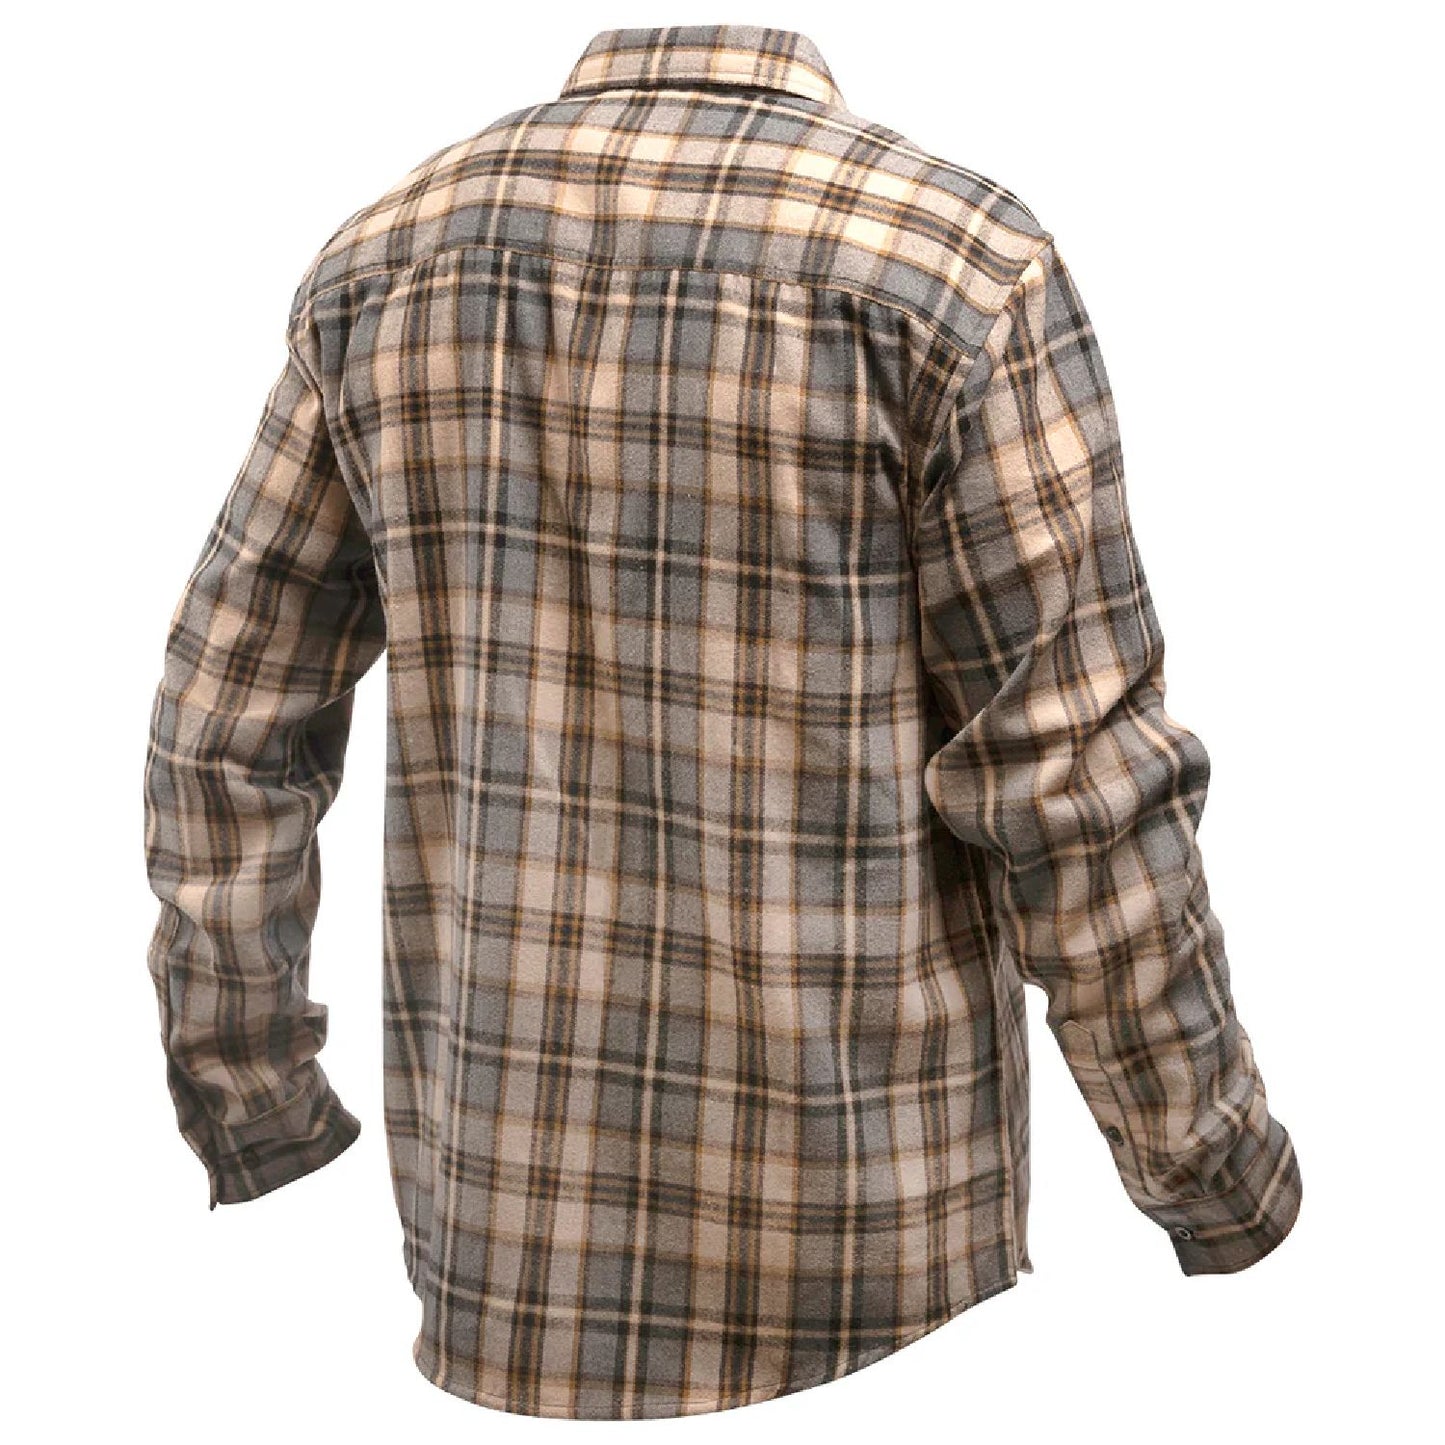 Fasthouse Saturday Night Special Flannel Beige - Fasthouse Flannels